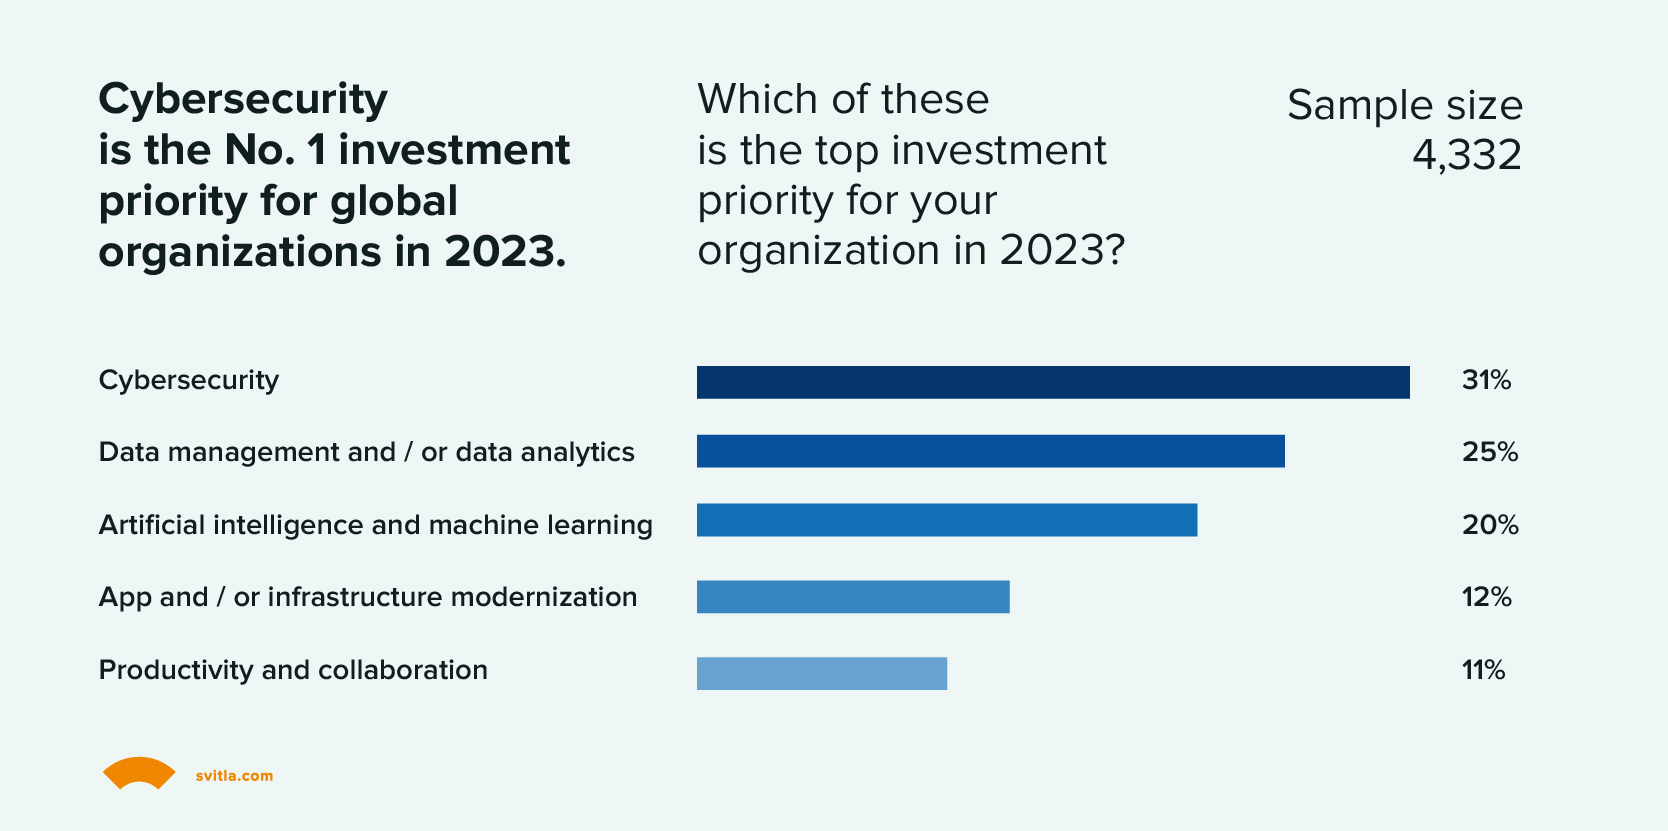 Companies' top investment priority in 2023